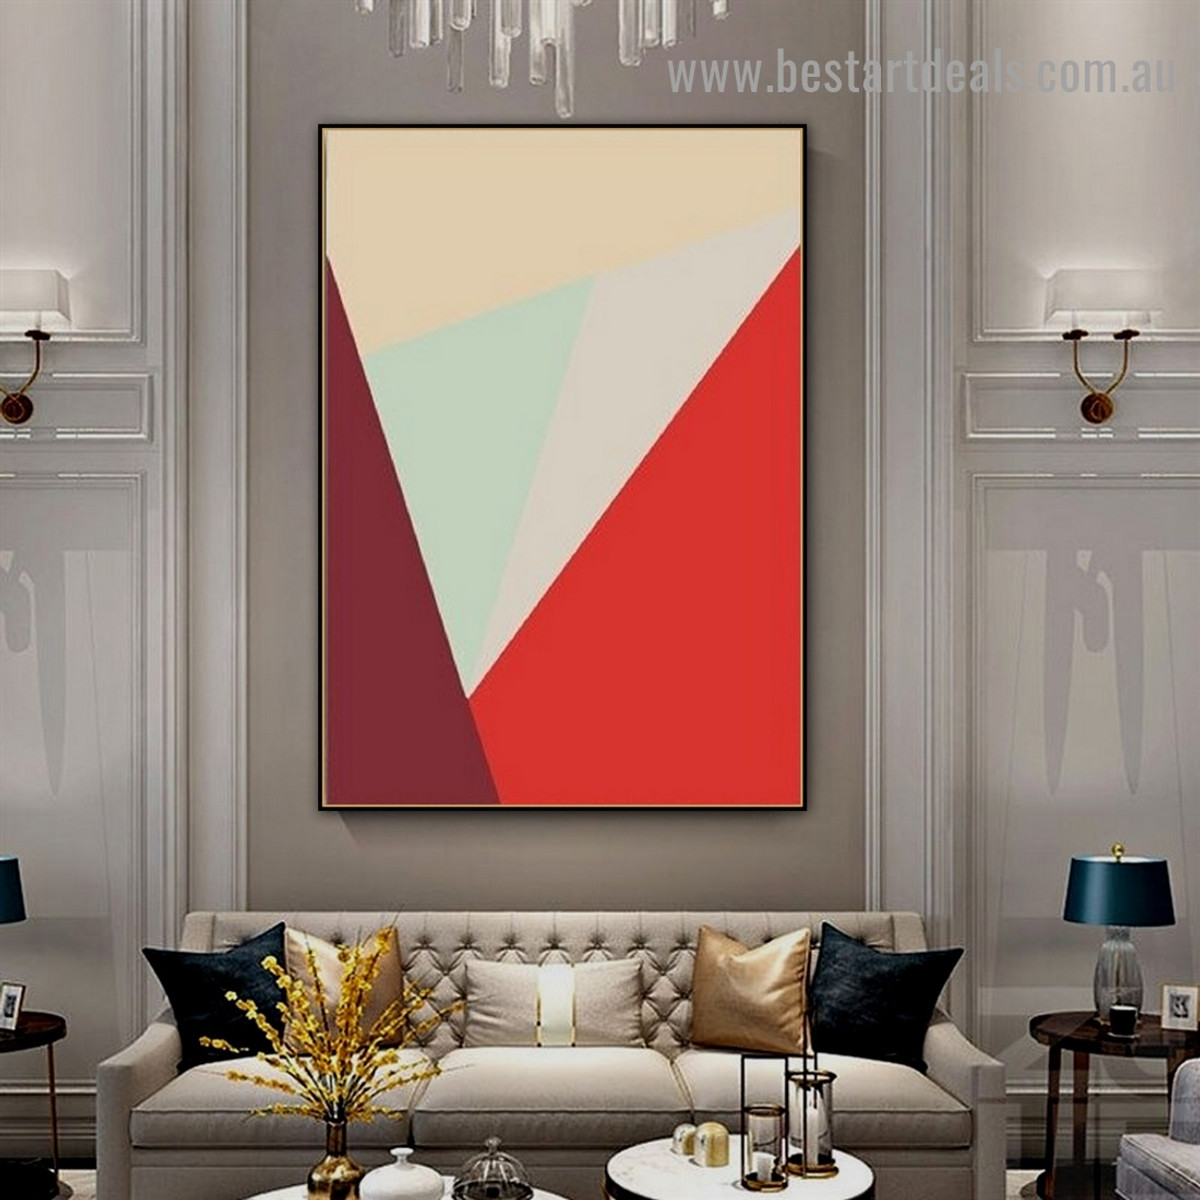 Zigzag Triangular Design Abstract Geometric Modern Framed Portrait Picture Canvas Print for Room Wall Decoration